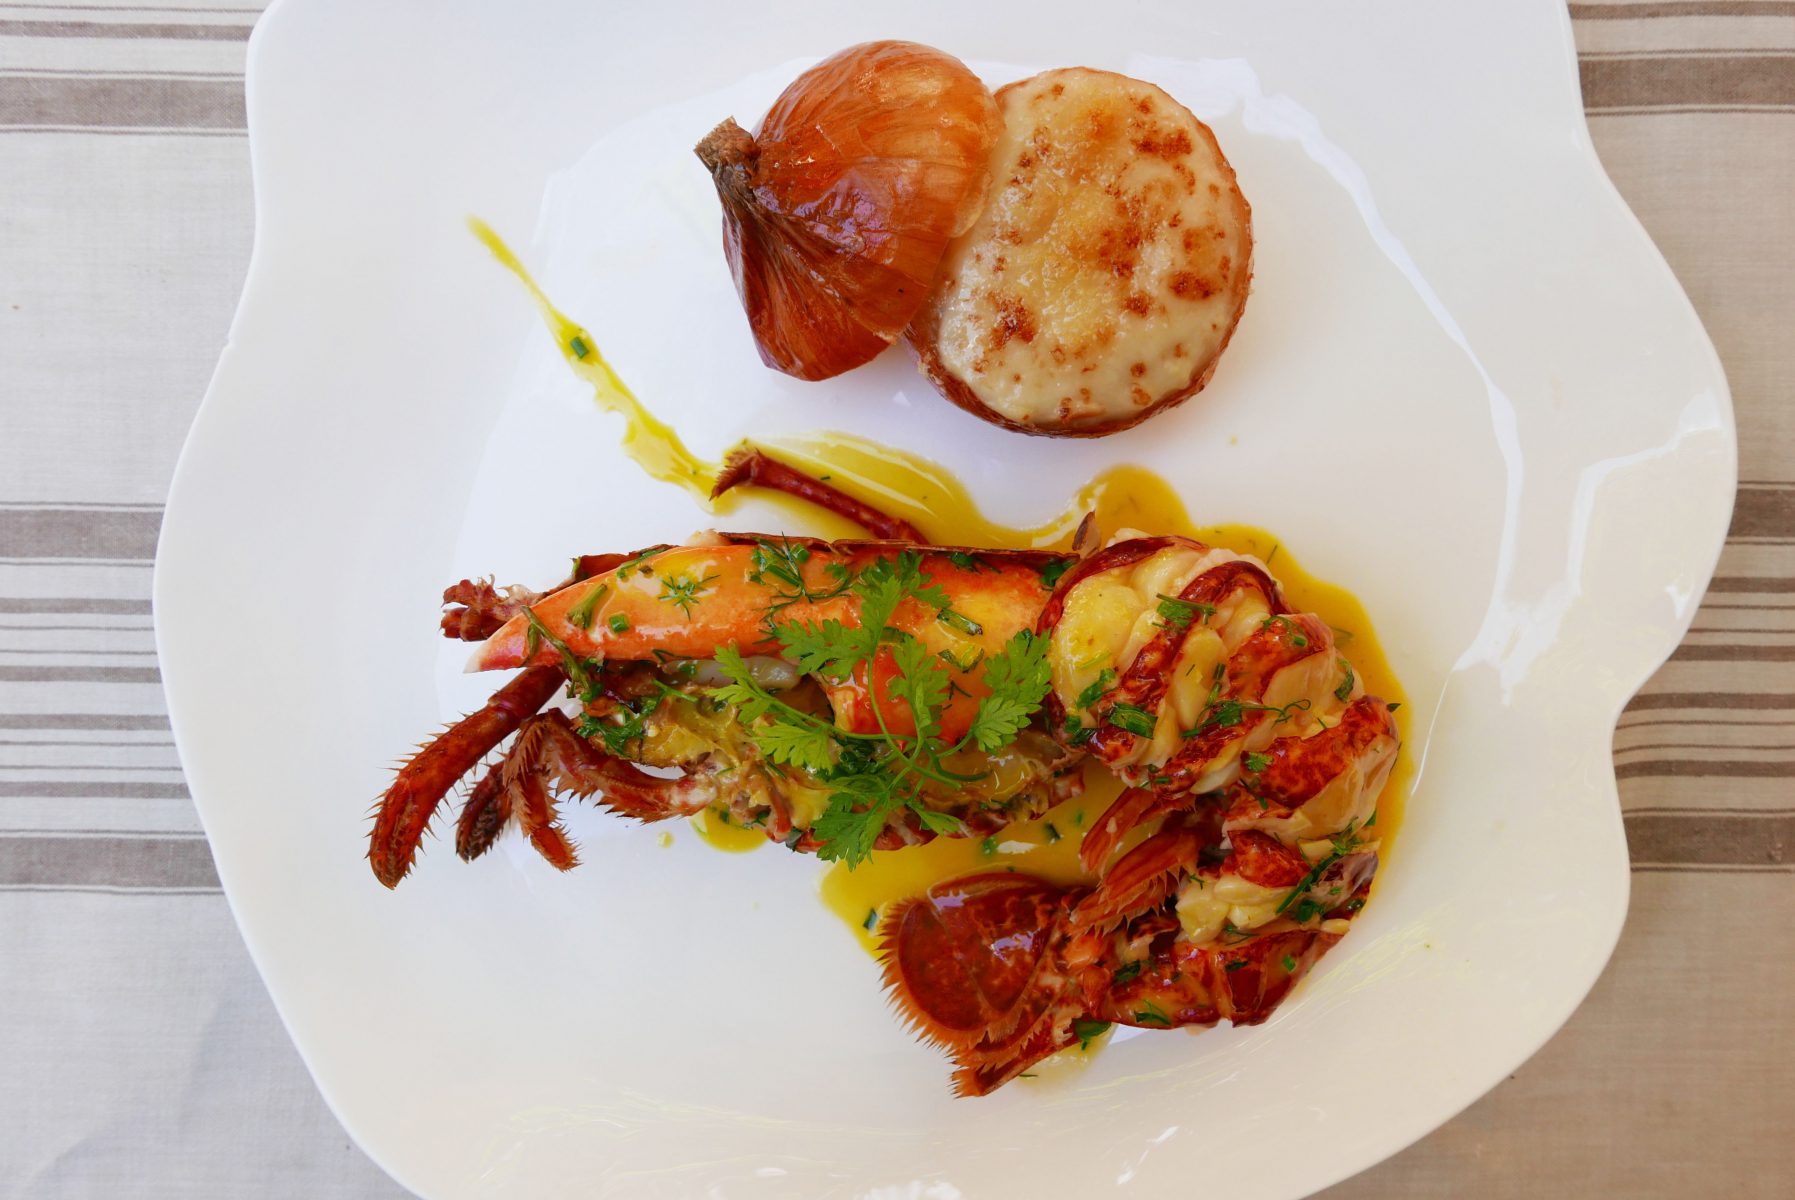 Smoked and roasted lobster, onion confit